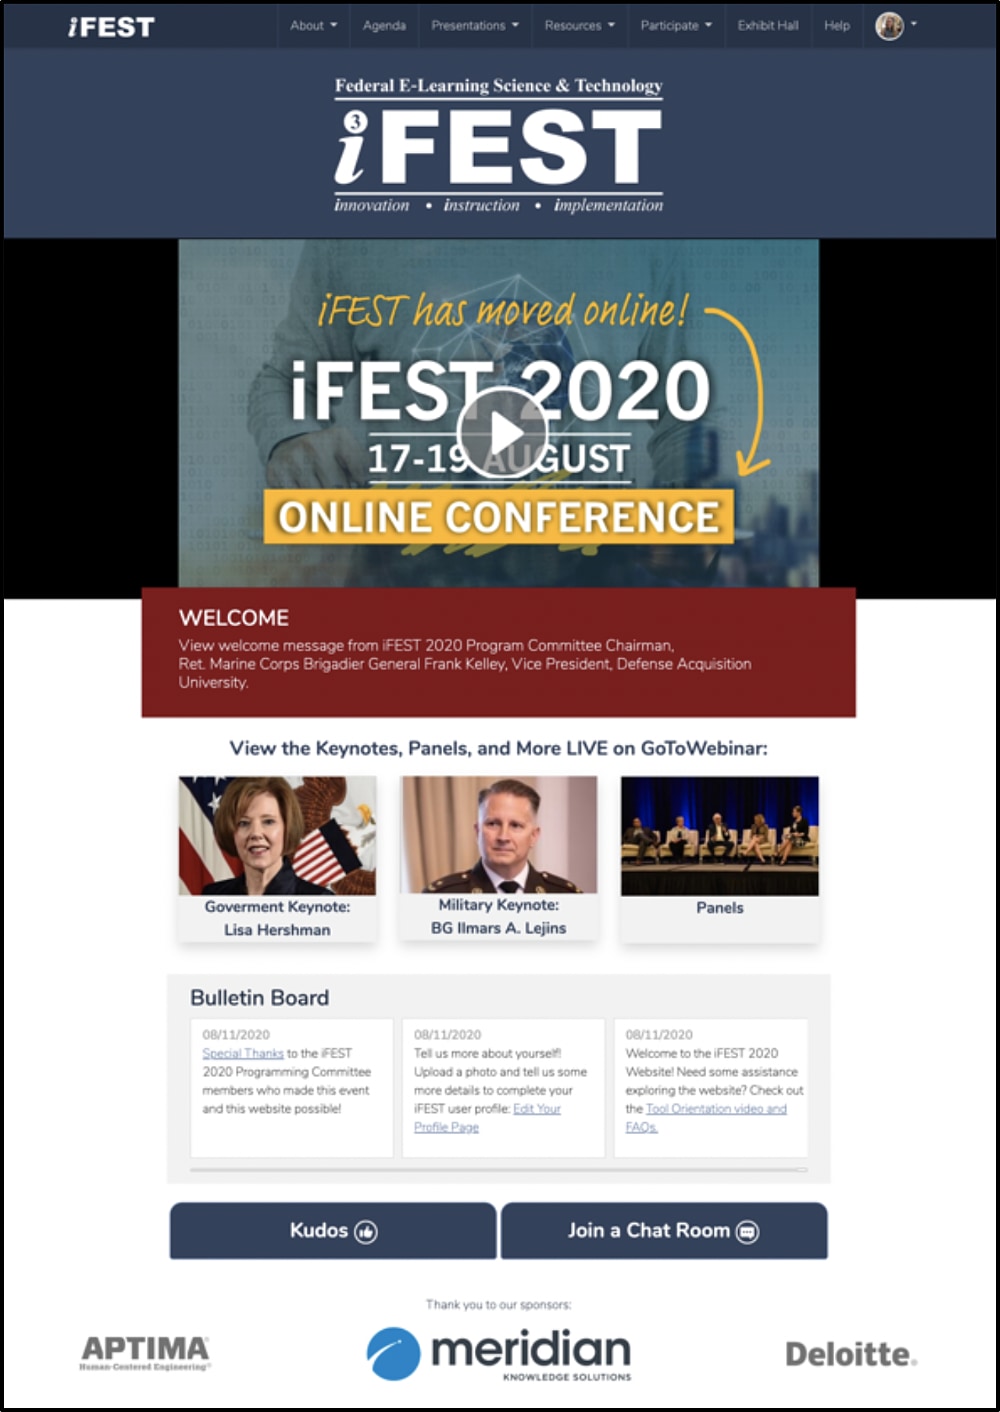 Home Page of www.iFEST2020.com